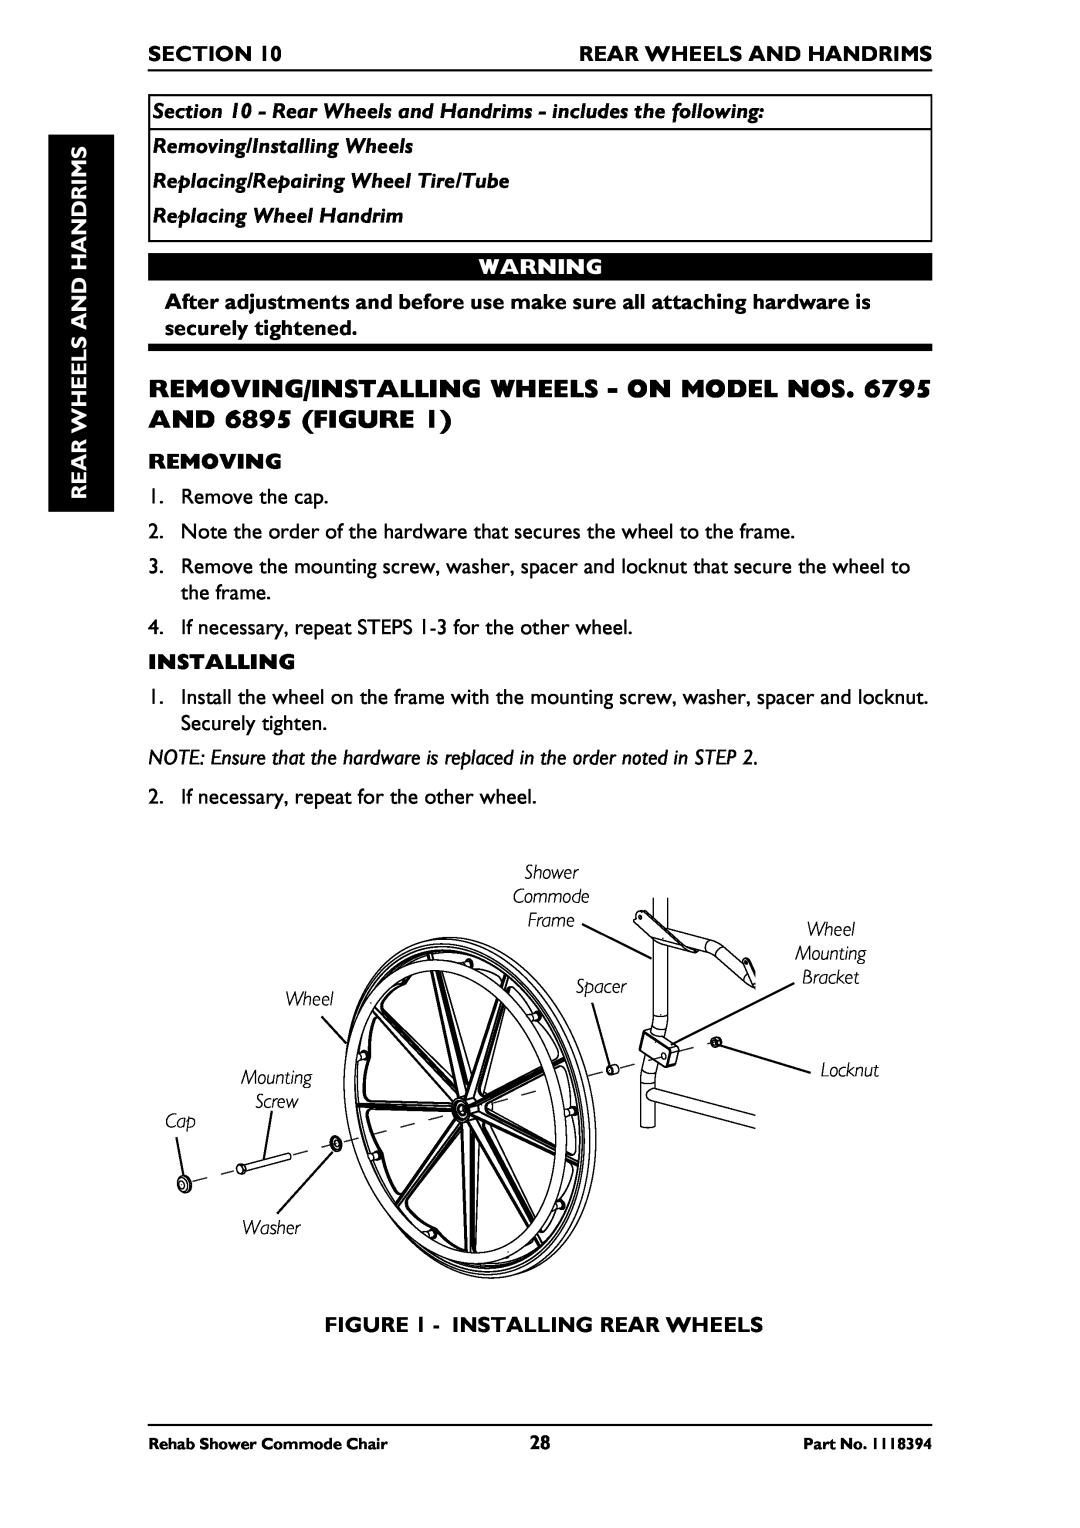 Invacare REMOVING/INSTALLING WHEELS - ON MODEL NOS. 6795 AND 6895 FIGURE, Rear Wheels And Handrims, Section, Removing 